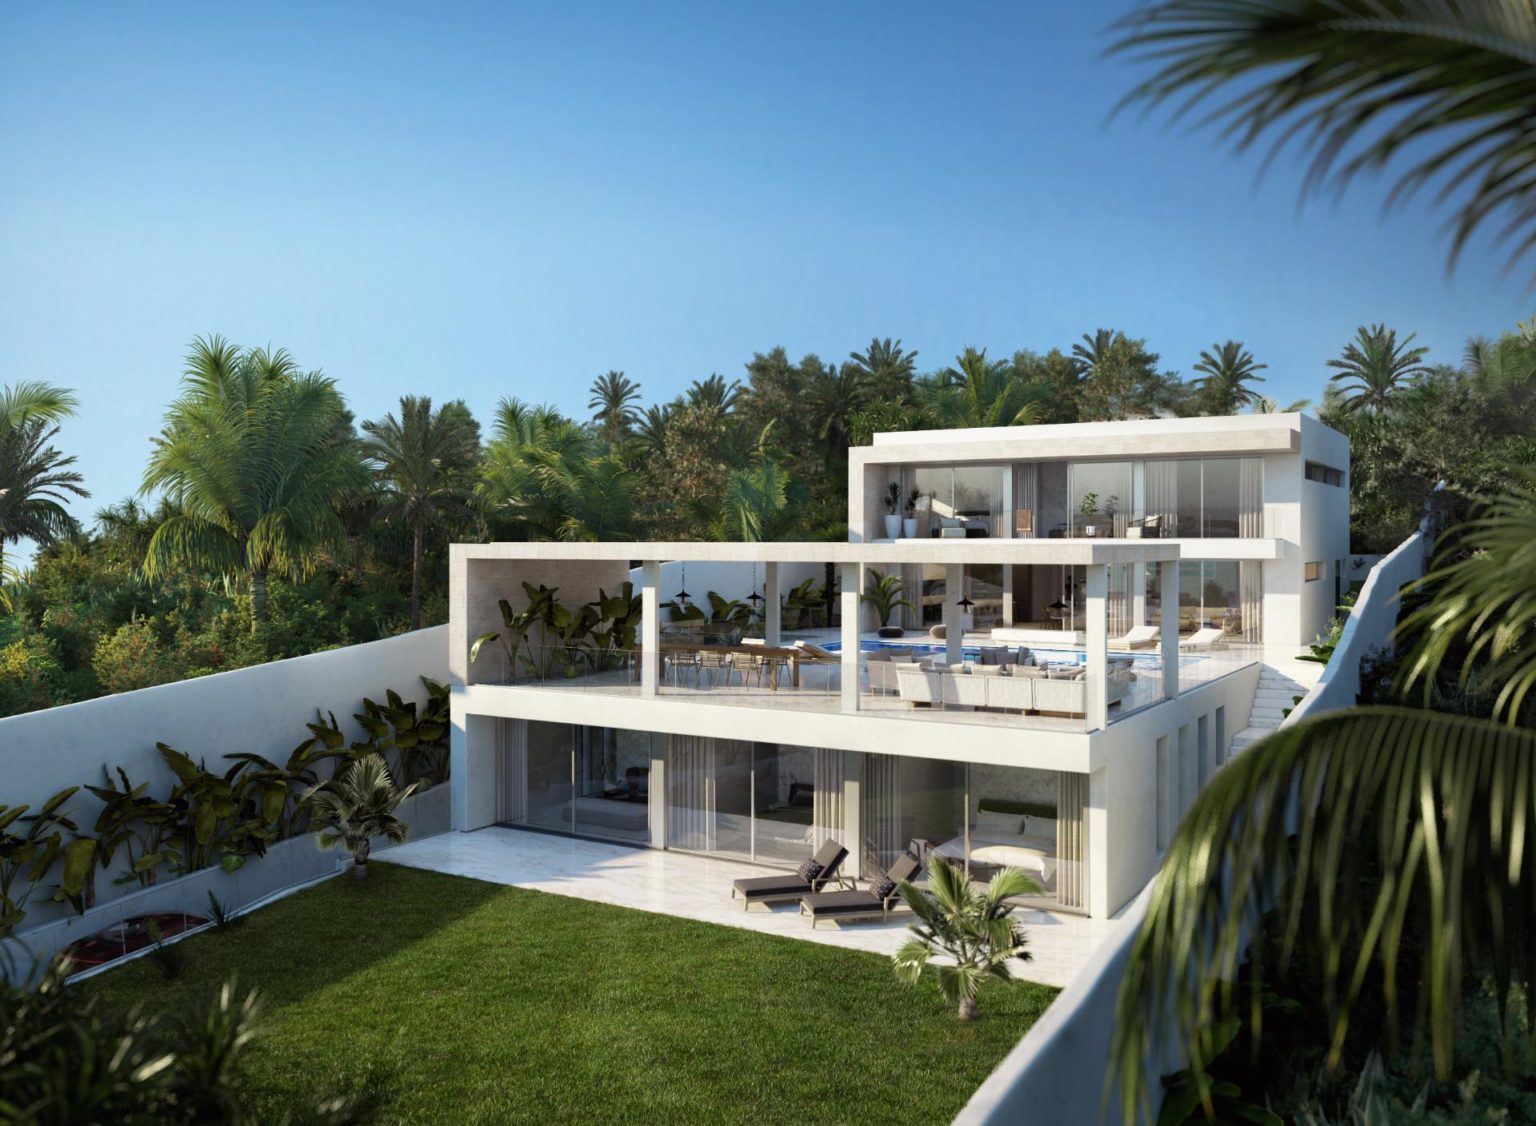 Exquisite new luxury villas with stunning sea views in great location